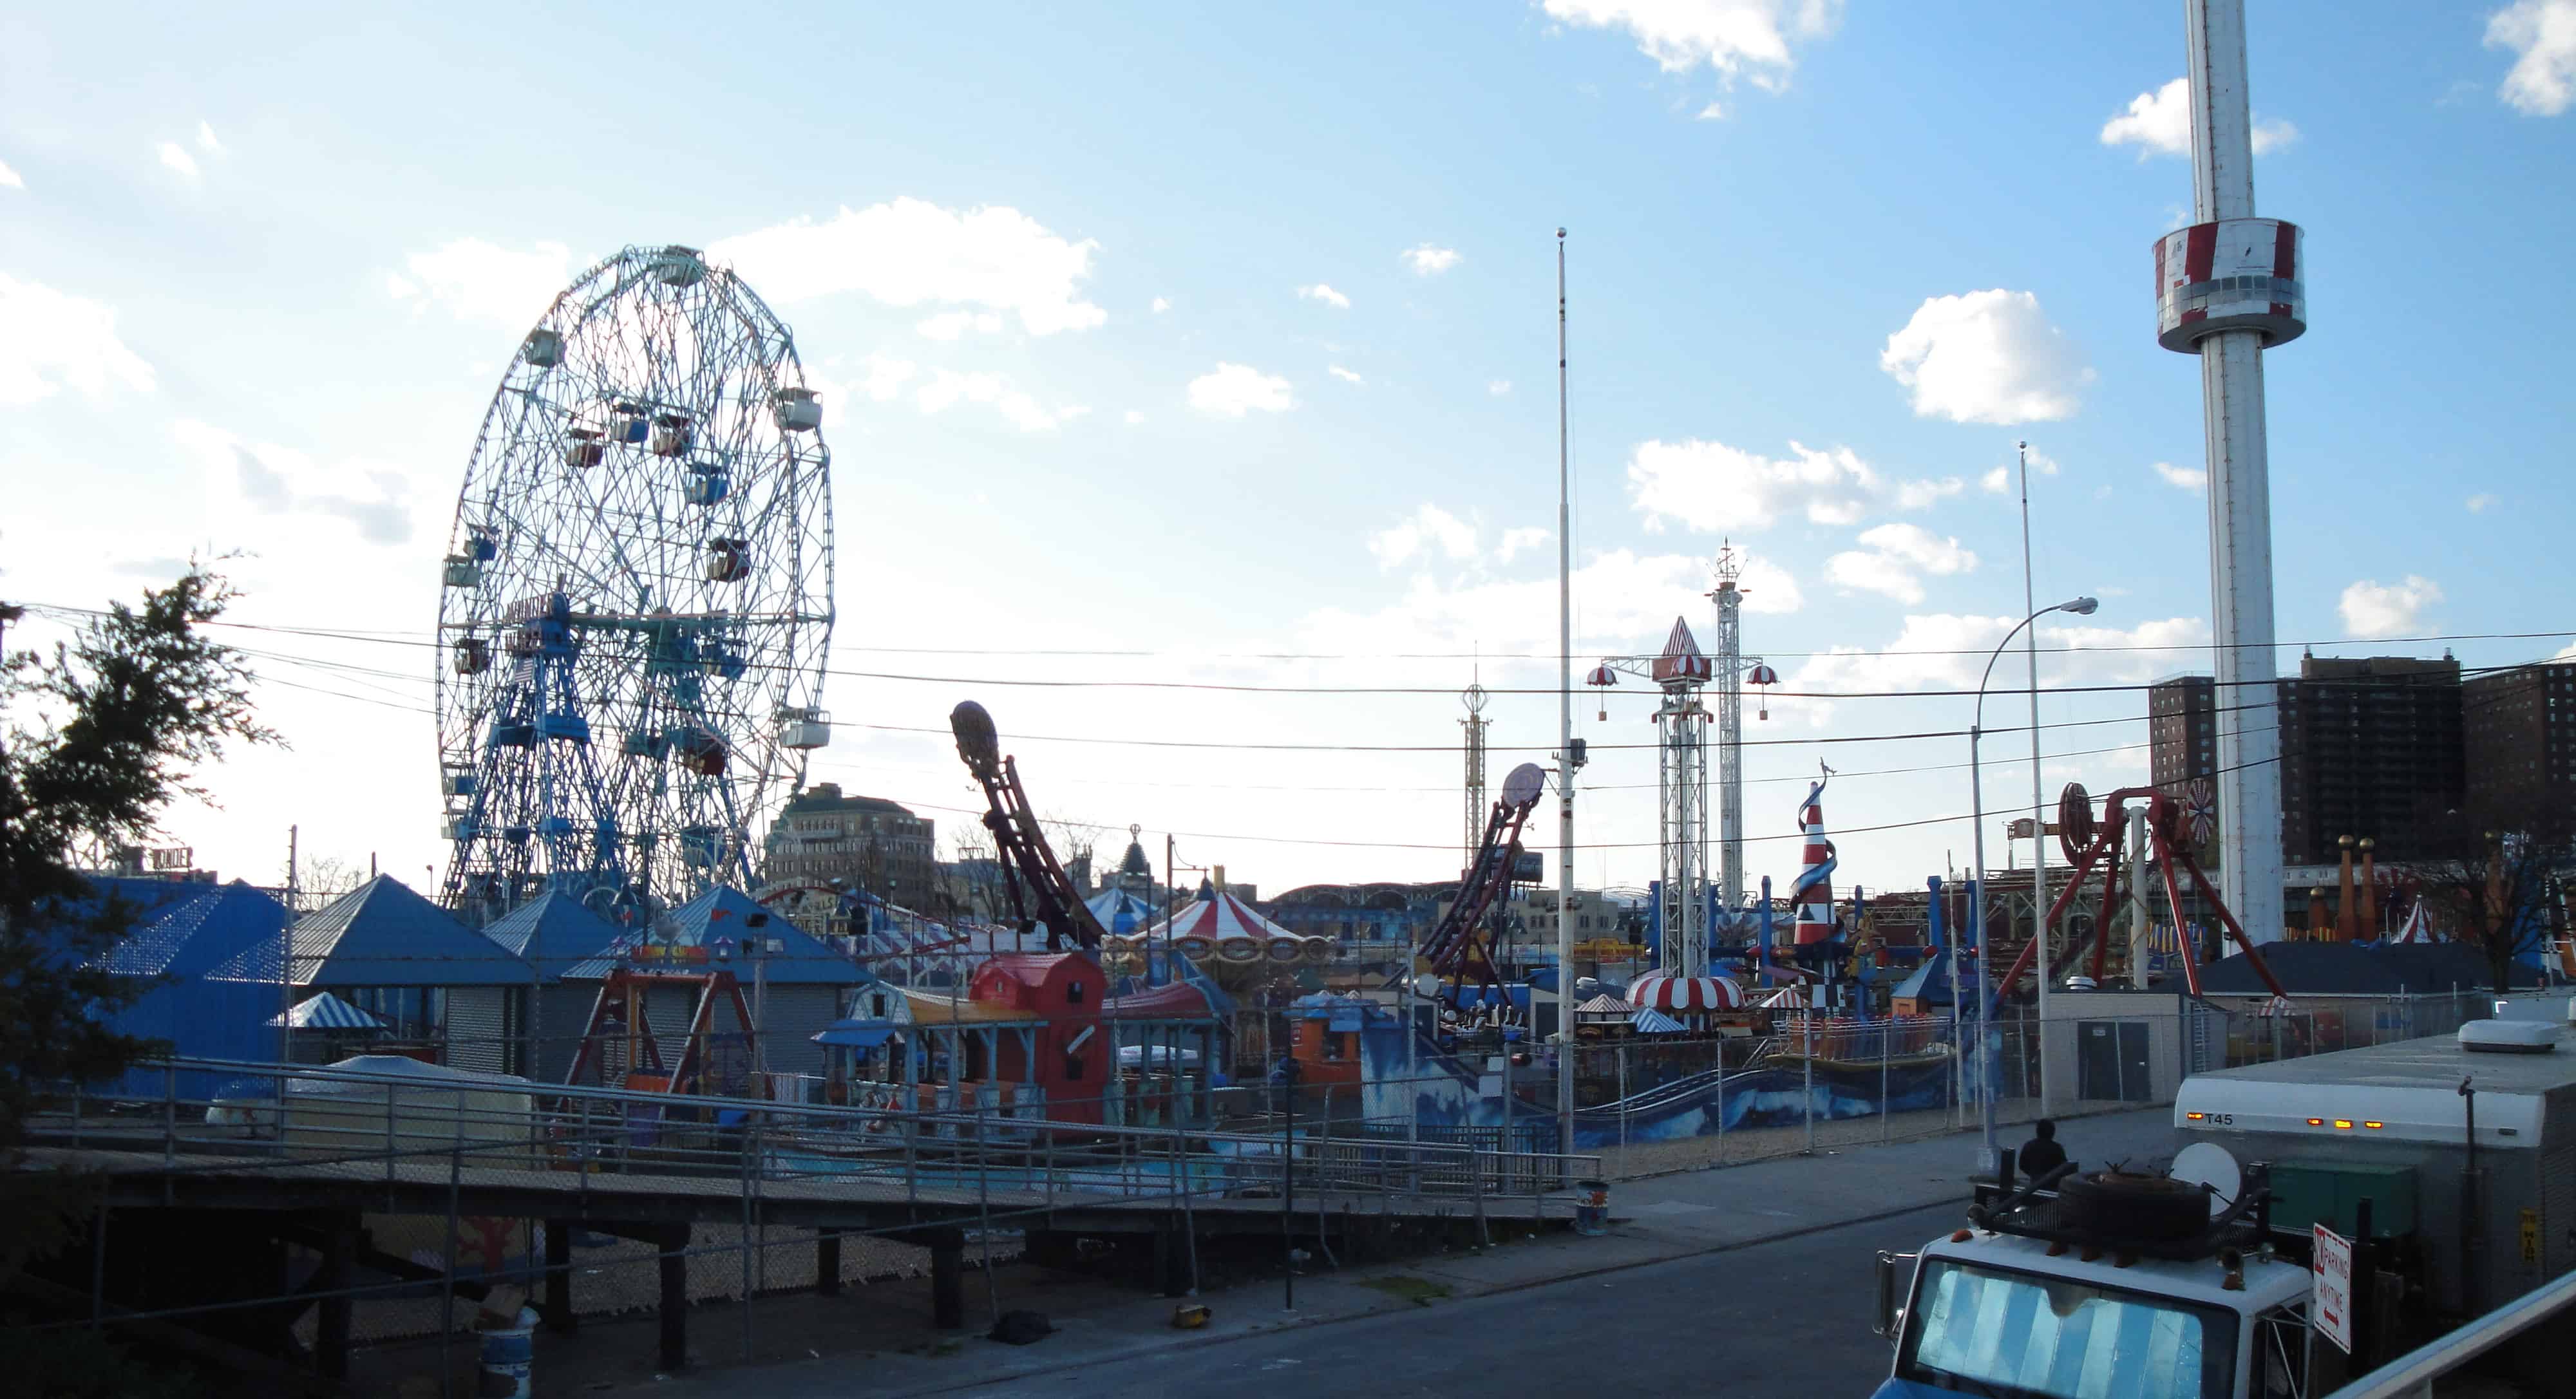 A view of the fenced-off amusement park.